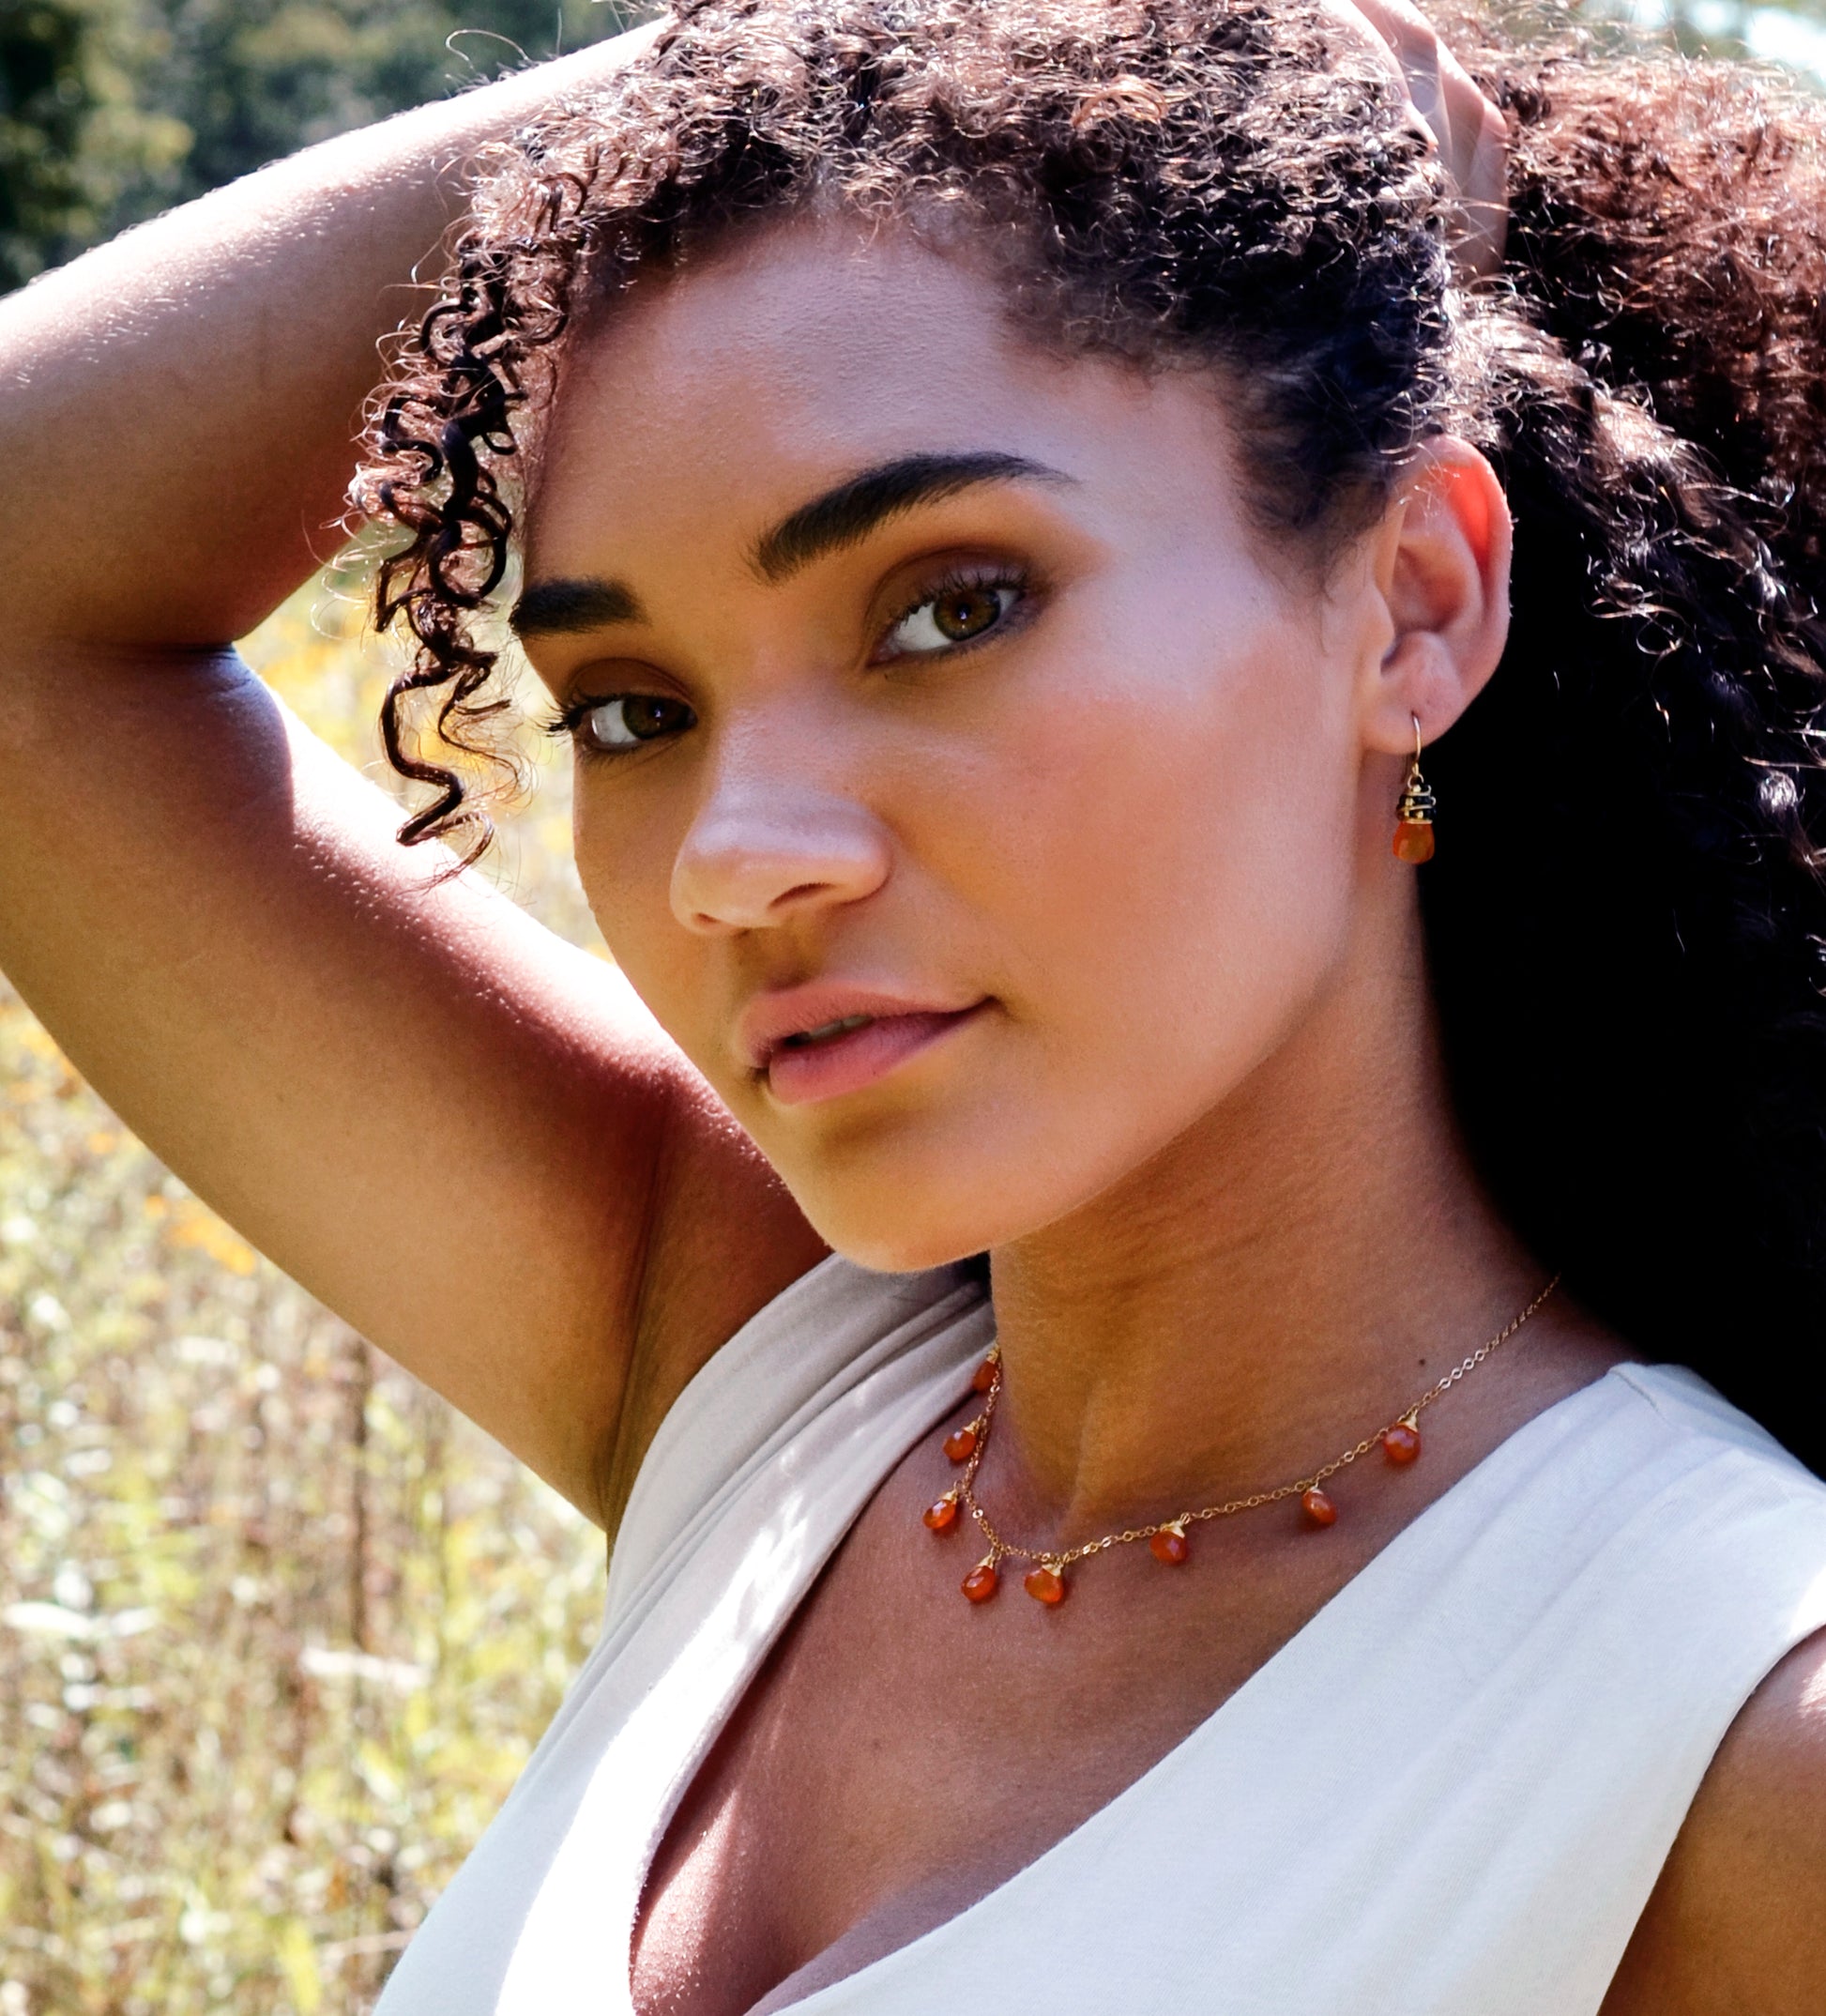 Handmade necklace featuring nine natural Carnelian gemstones set onto a gold filled chain. Sterling Silver is also available. Modeled Image.